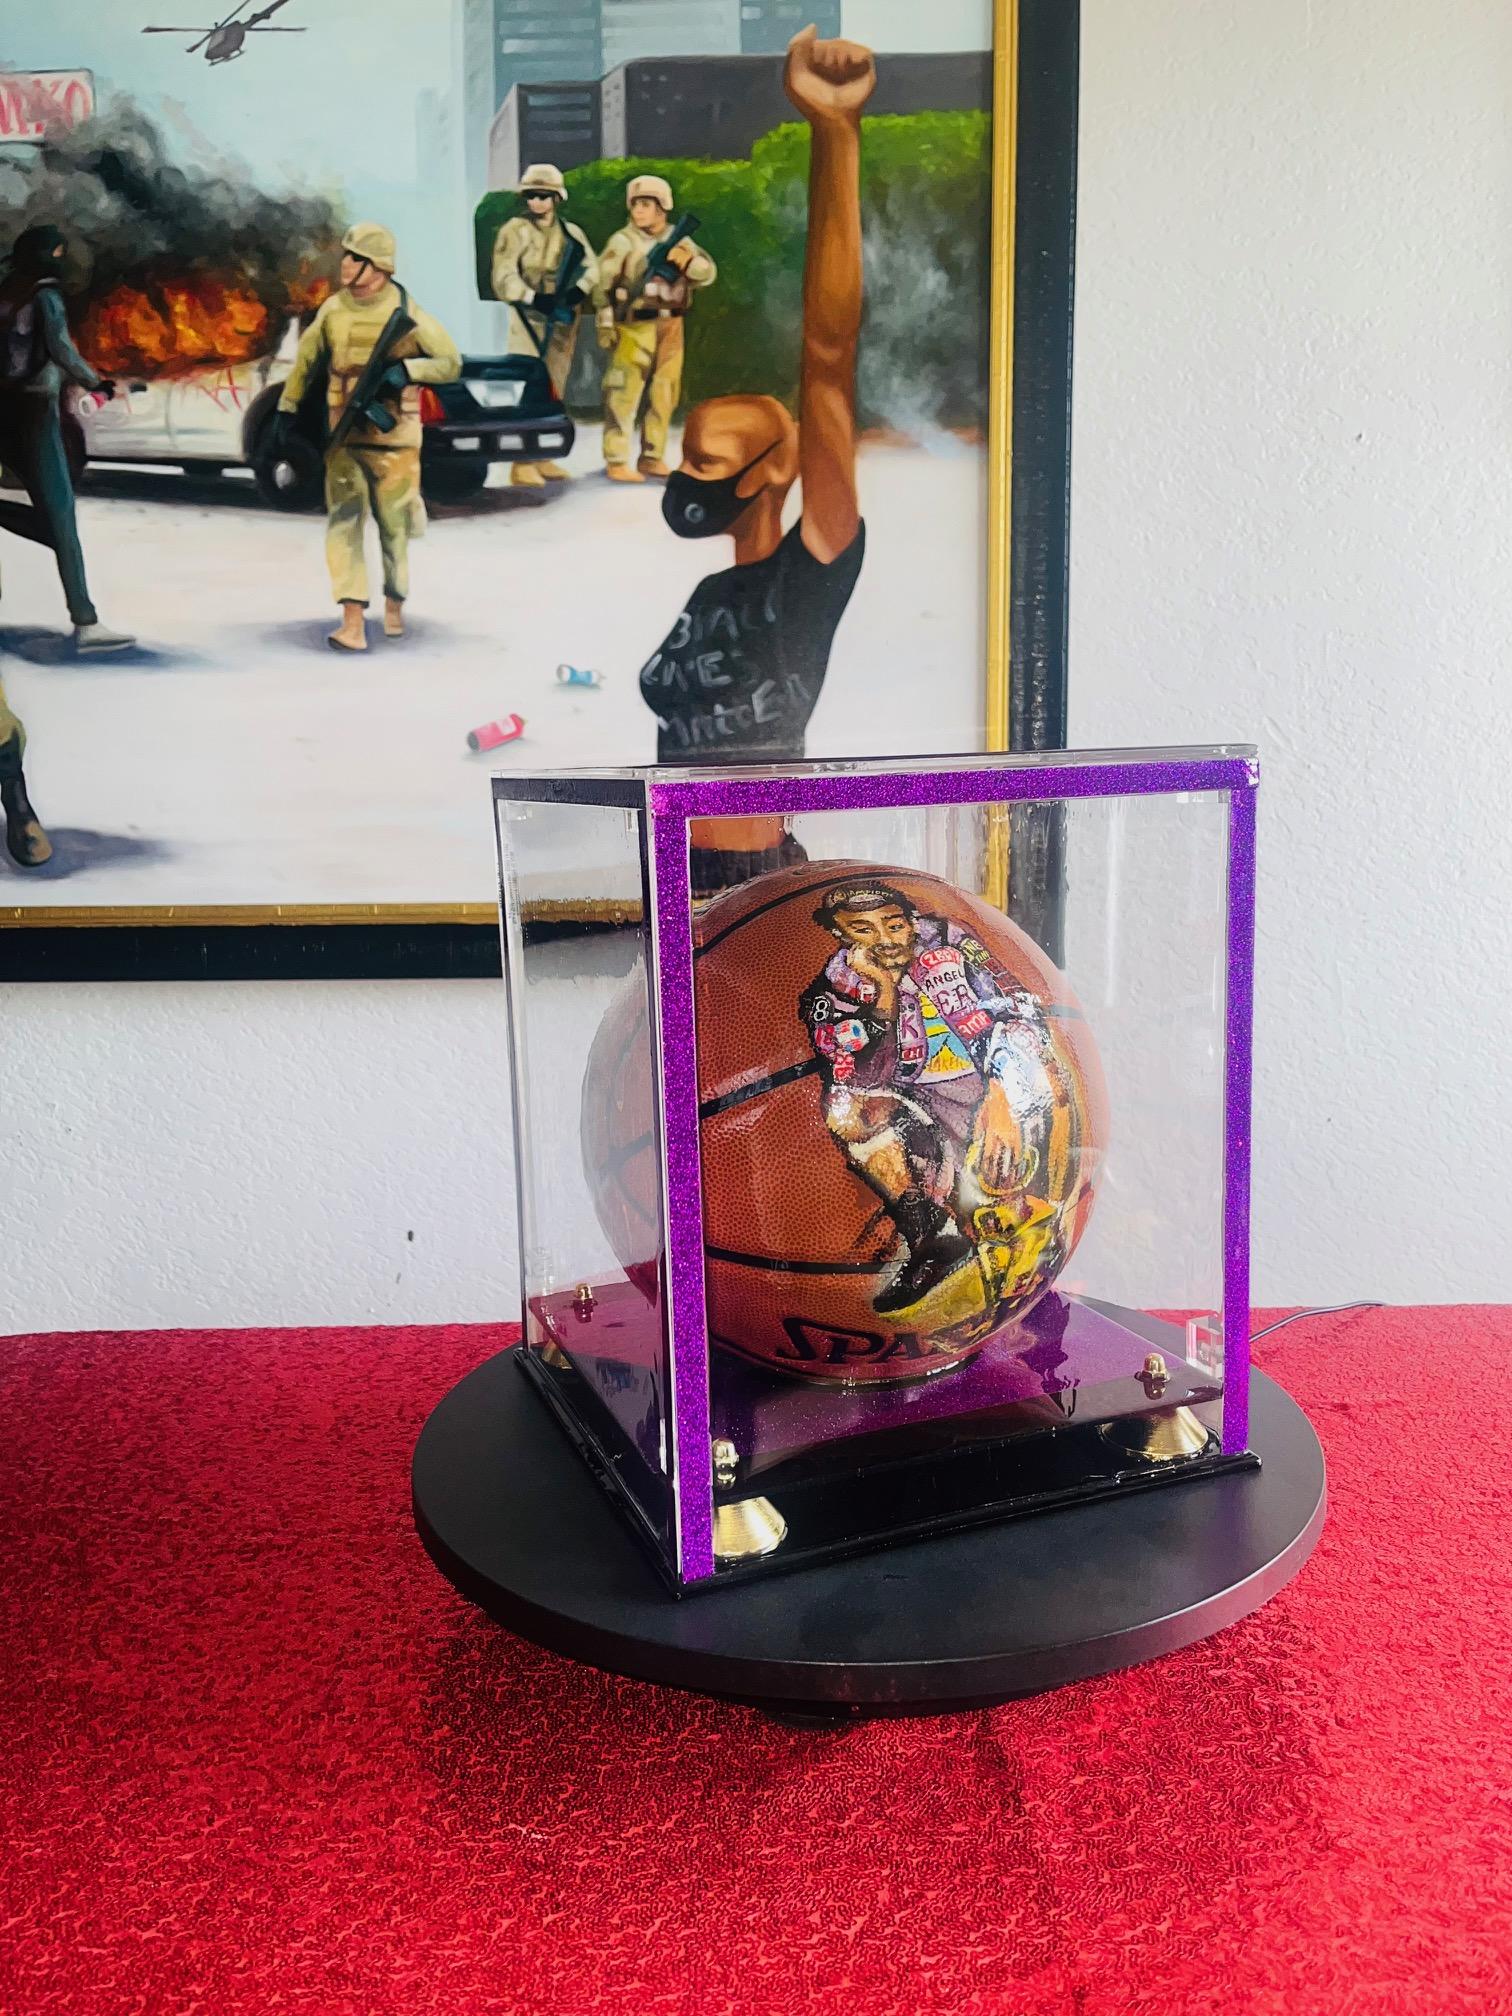                  **ANNUAL SUPER SALE TIL APRIL 25th ONLY**
*This Price Won't Be Repeated Again This Year - Take Advantage Of It*

'Kobe Bryant Super Basketball' is THE one of a kind original creation in the memorabilia collectors world.

From the